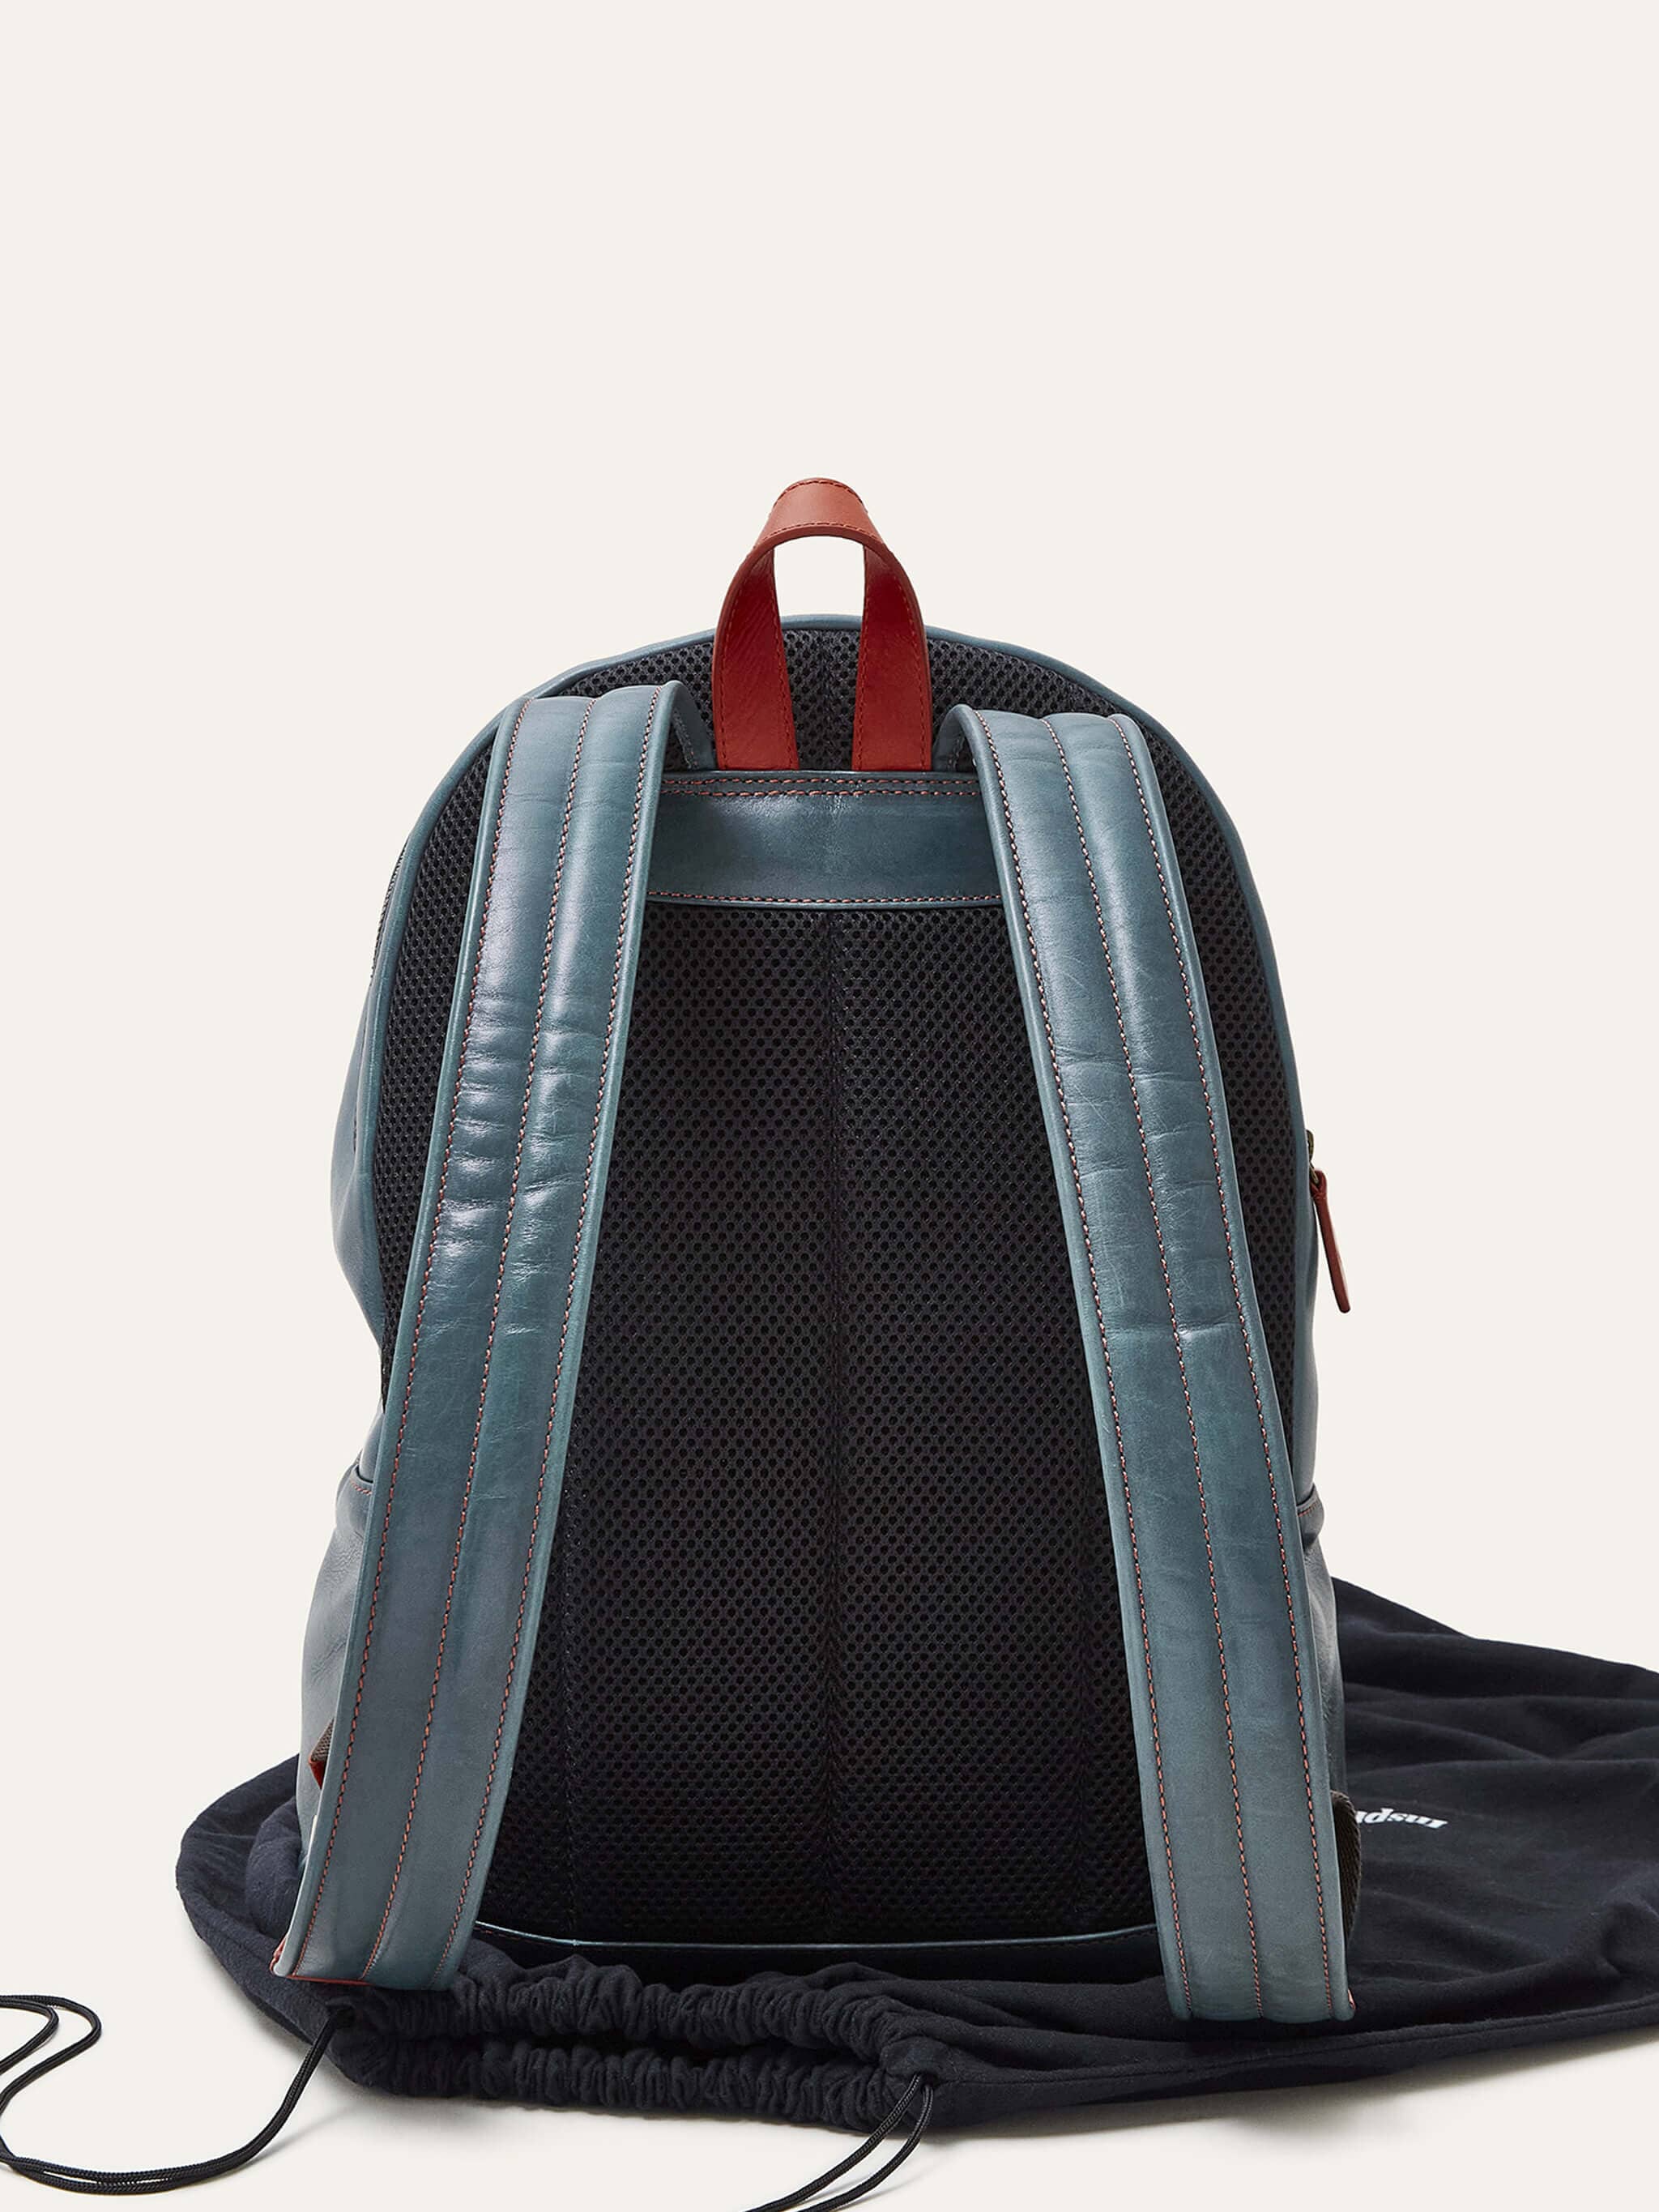 Teal Lucknow Leather Backpack